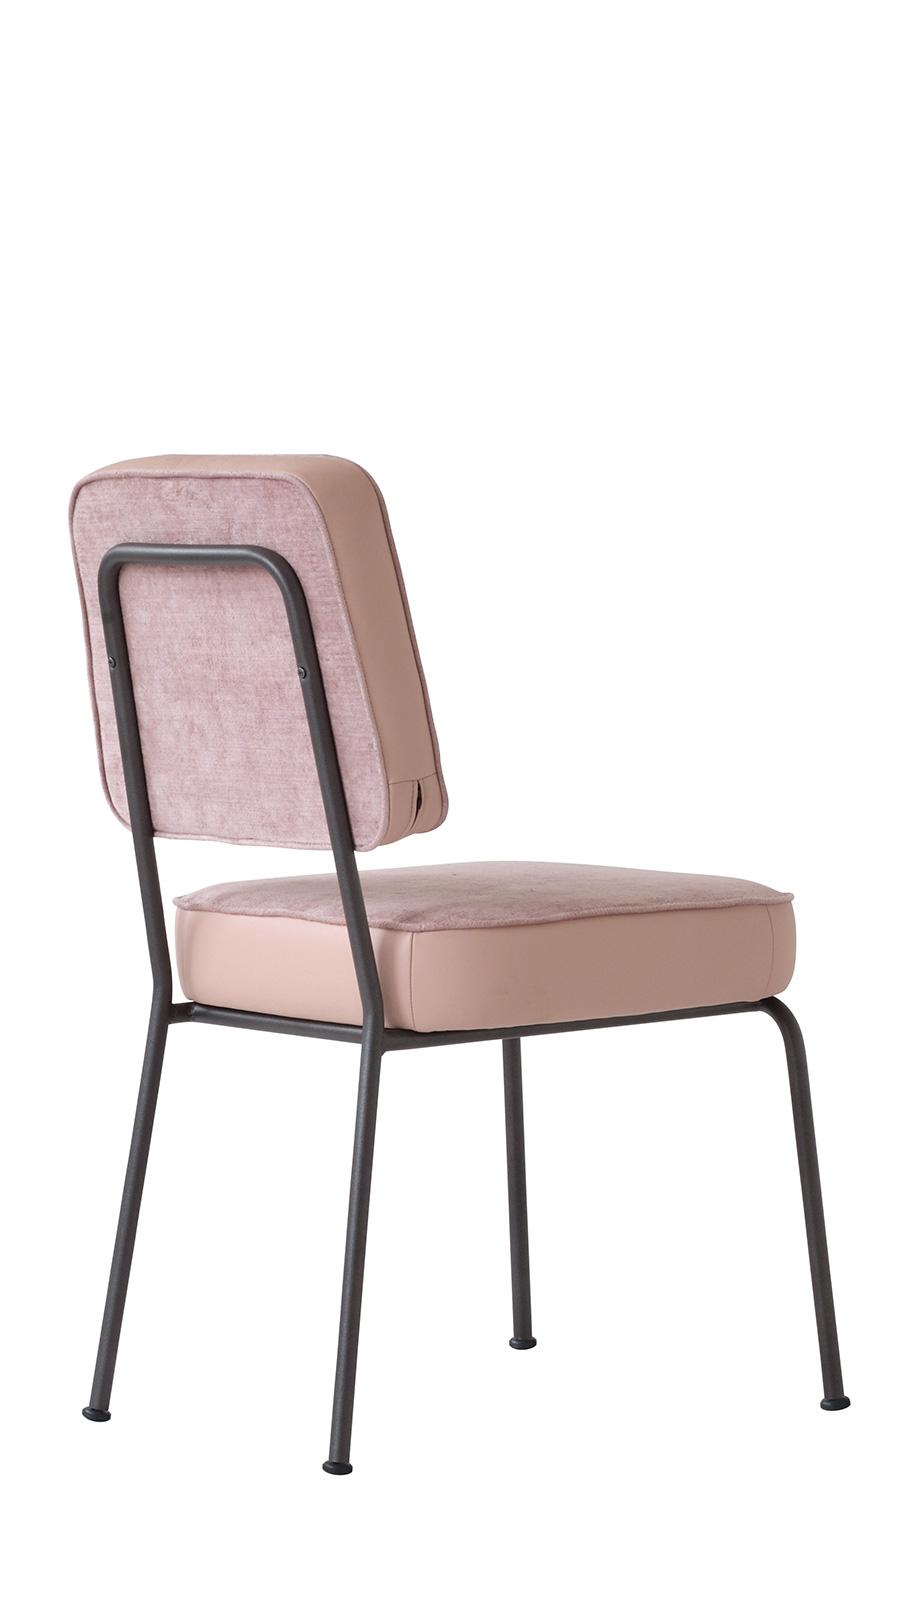 Metal structure. Soft seat and backrest are covered with velvet and soft leather available in several colours. Vintage and classic style padded chair.